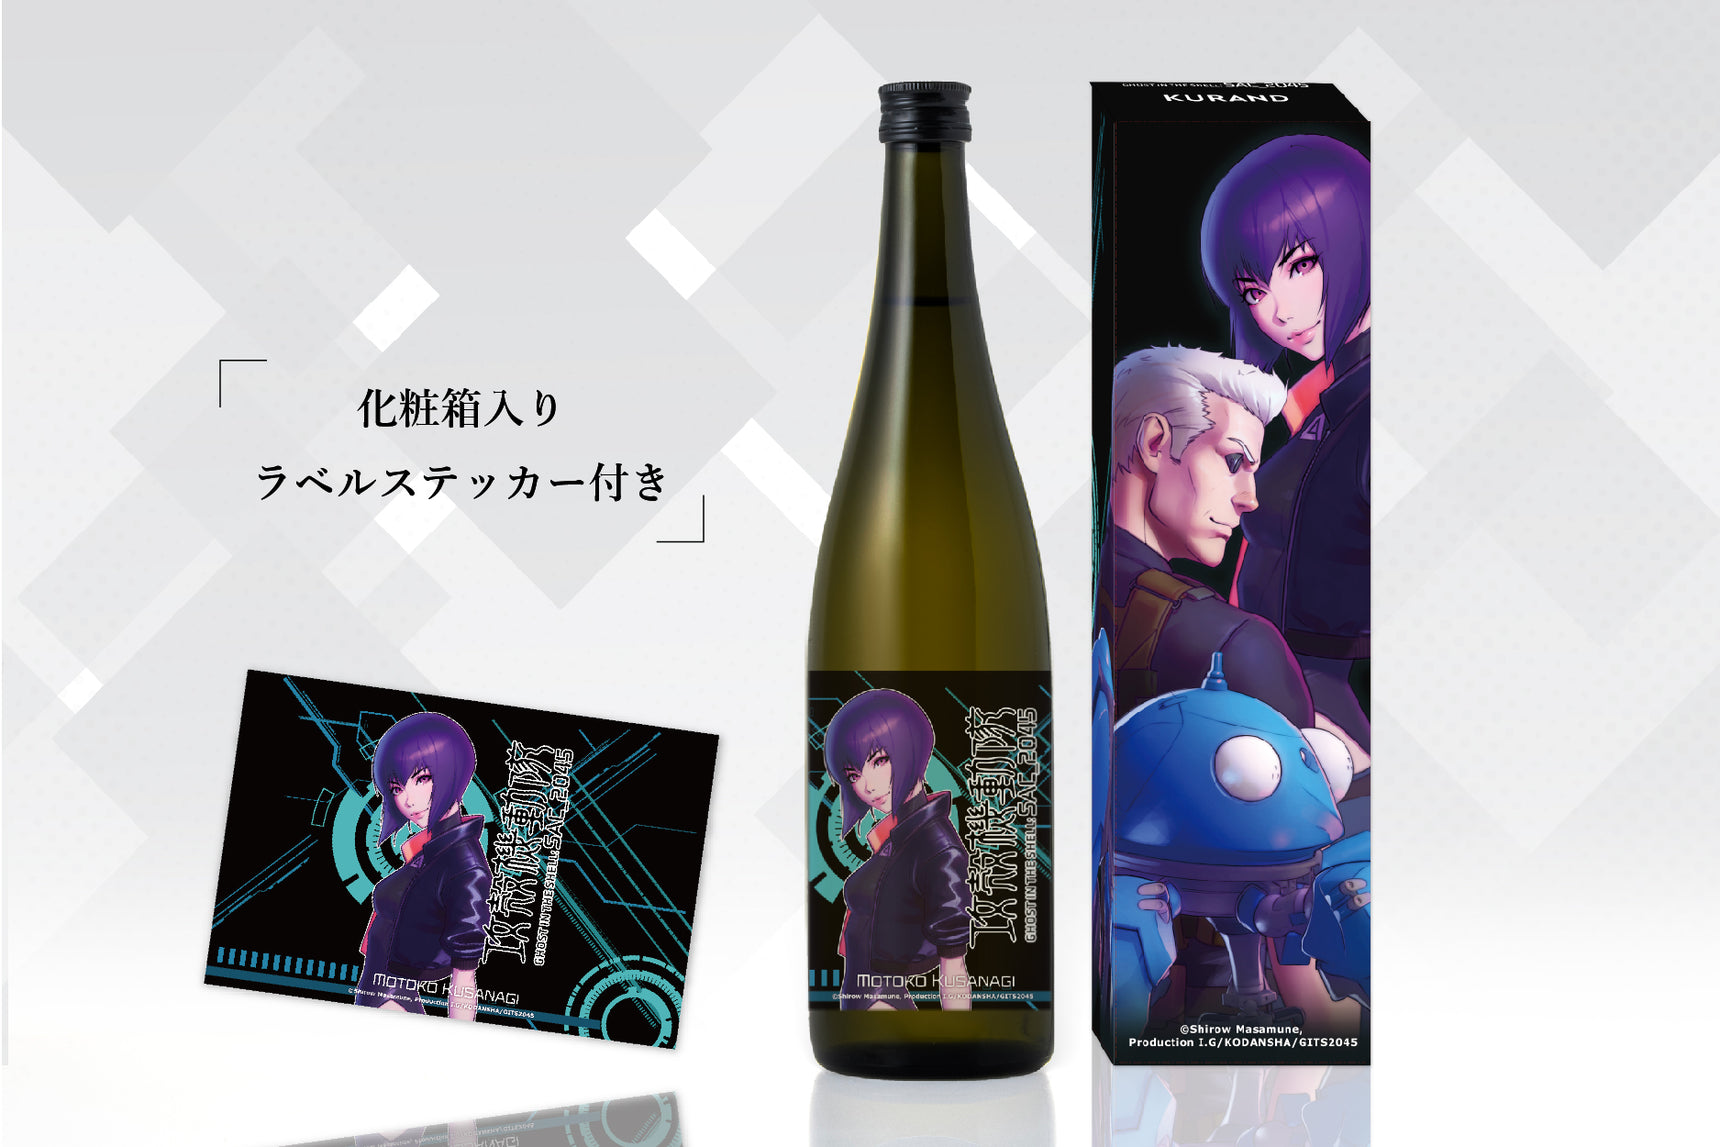 GHOST IN THE SHELL: SAC_2045 - 草薙素子ver. -